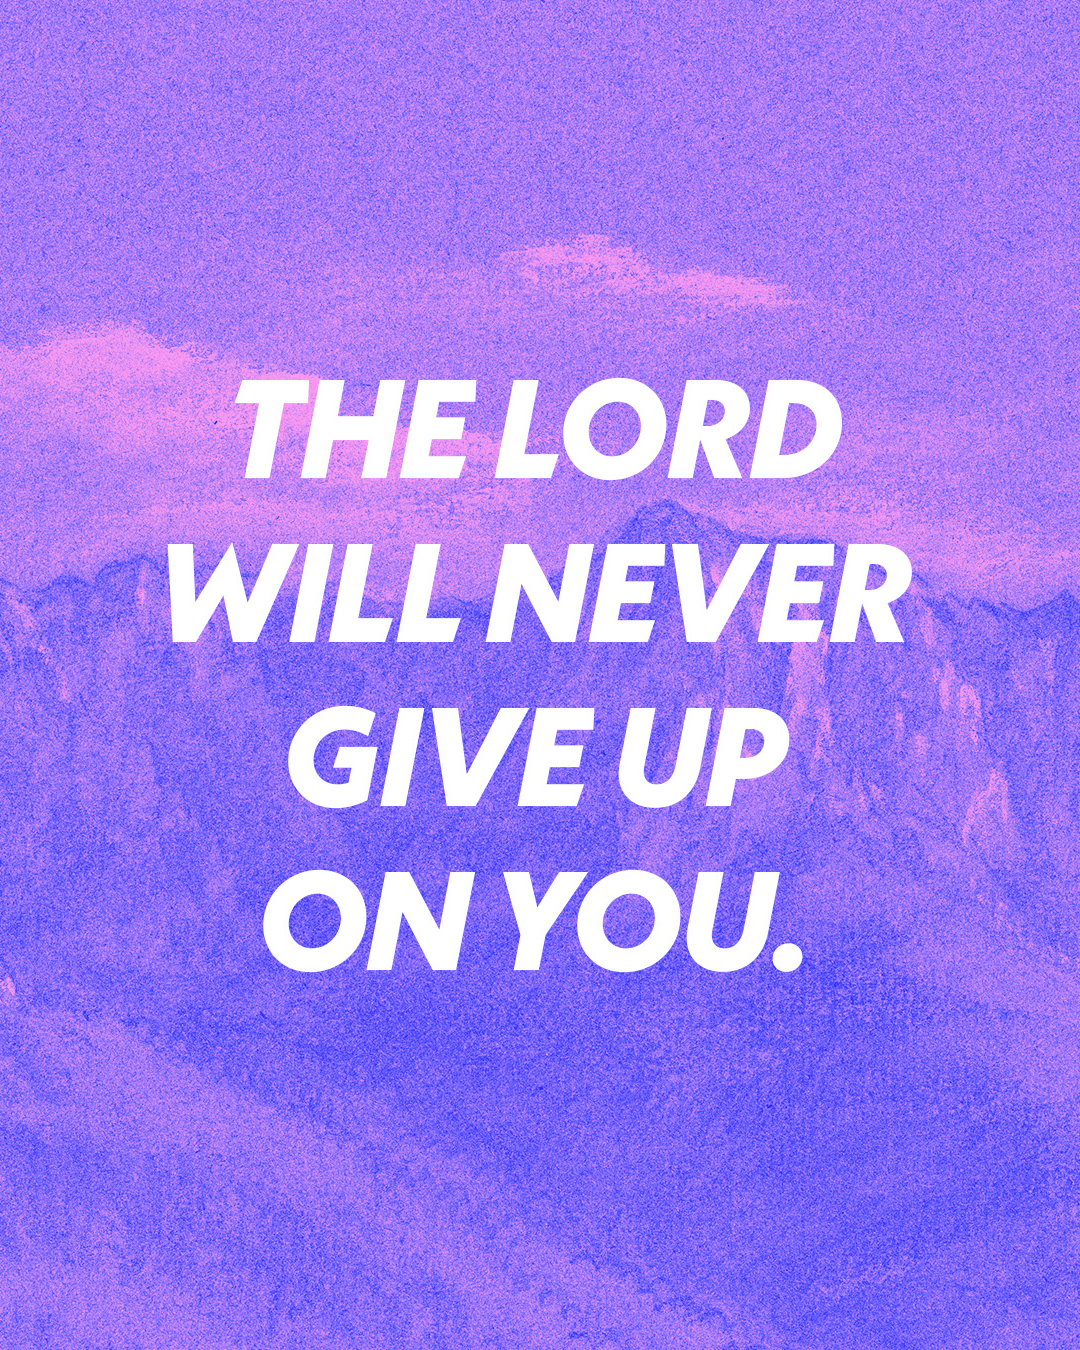 The Lord will never give up on you.